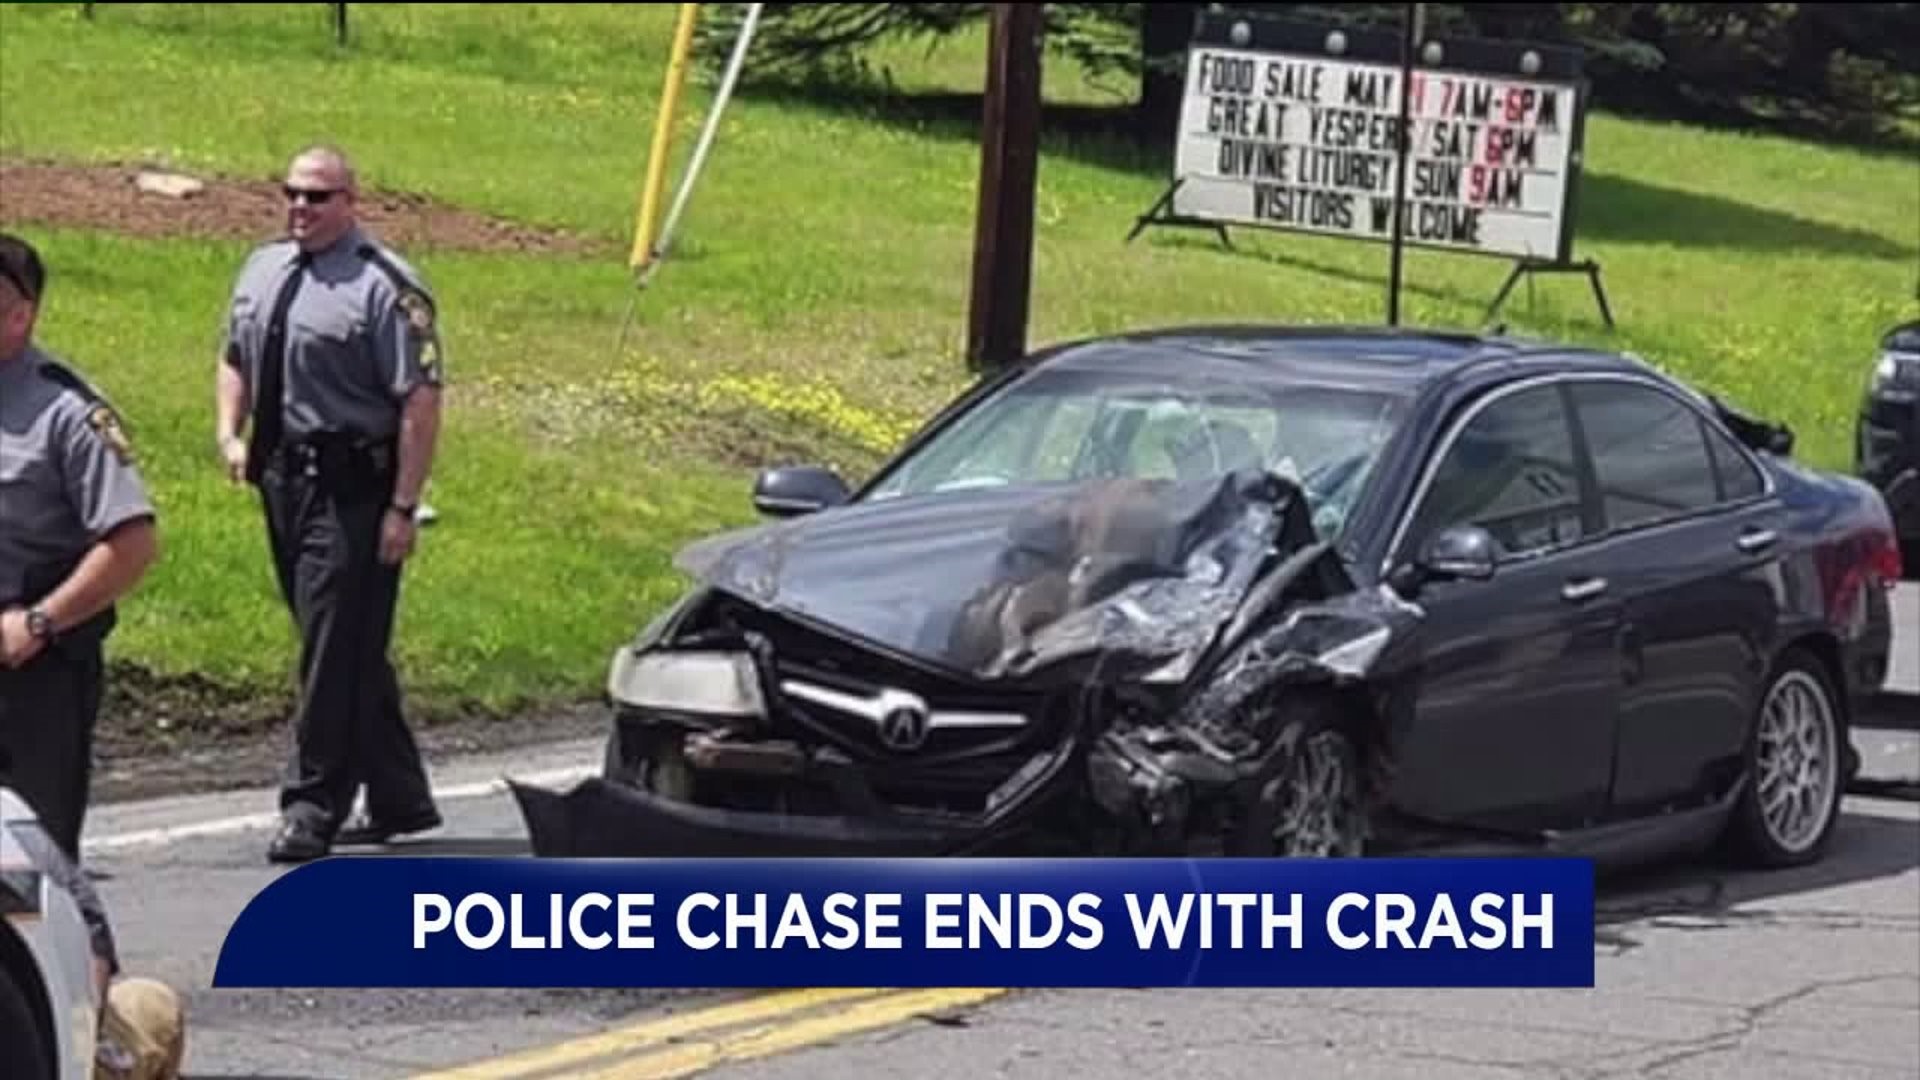 Man Charged After Leading Police on Chase, Causing Crash that Injured Two